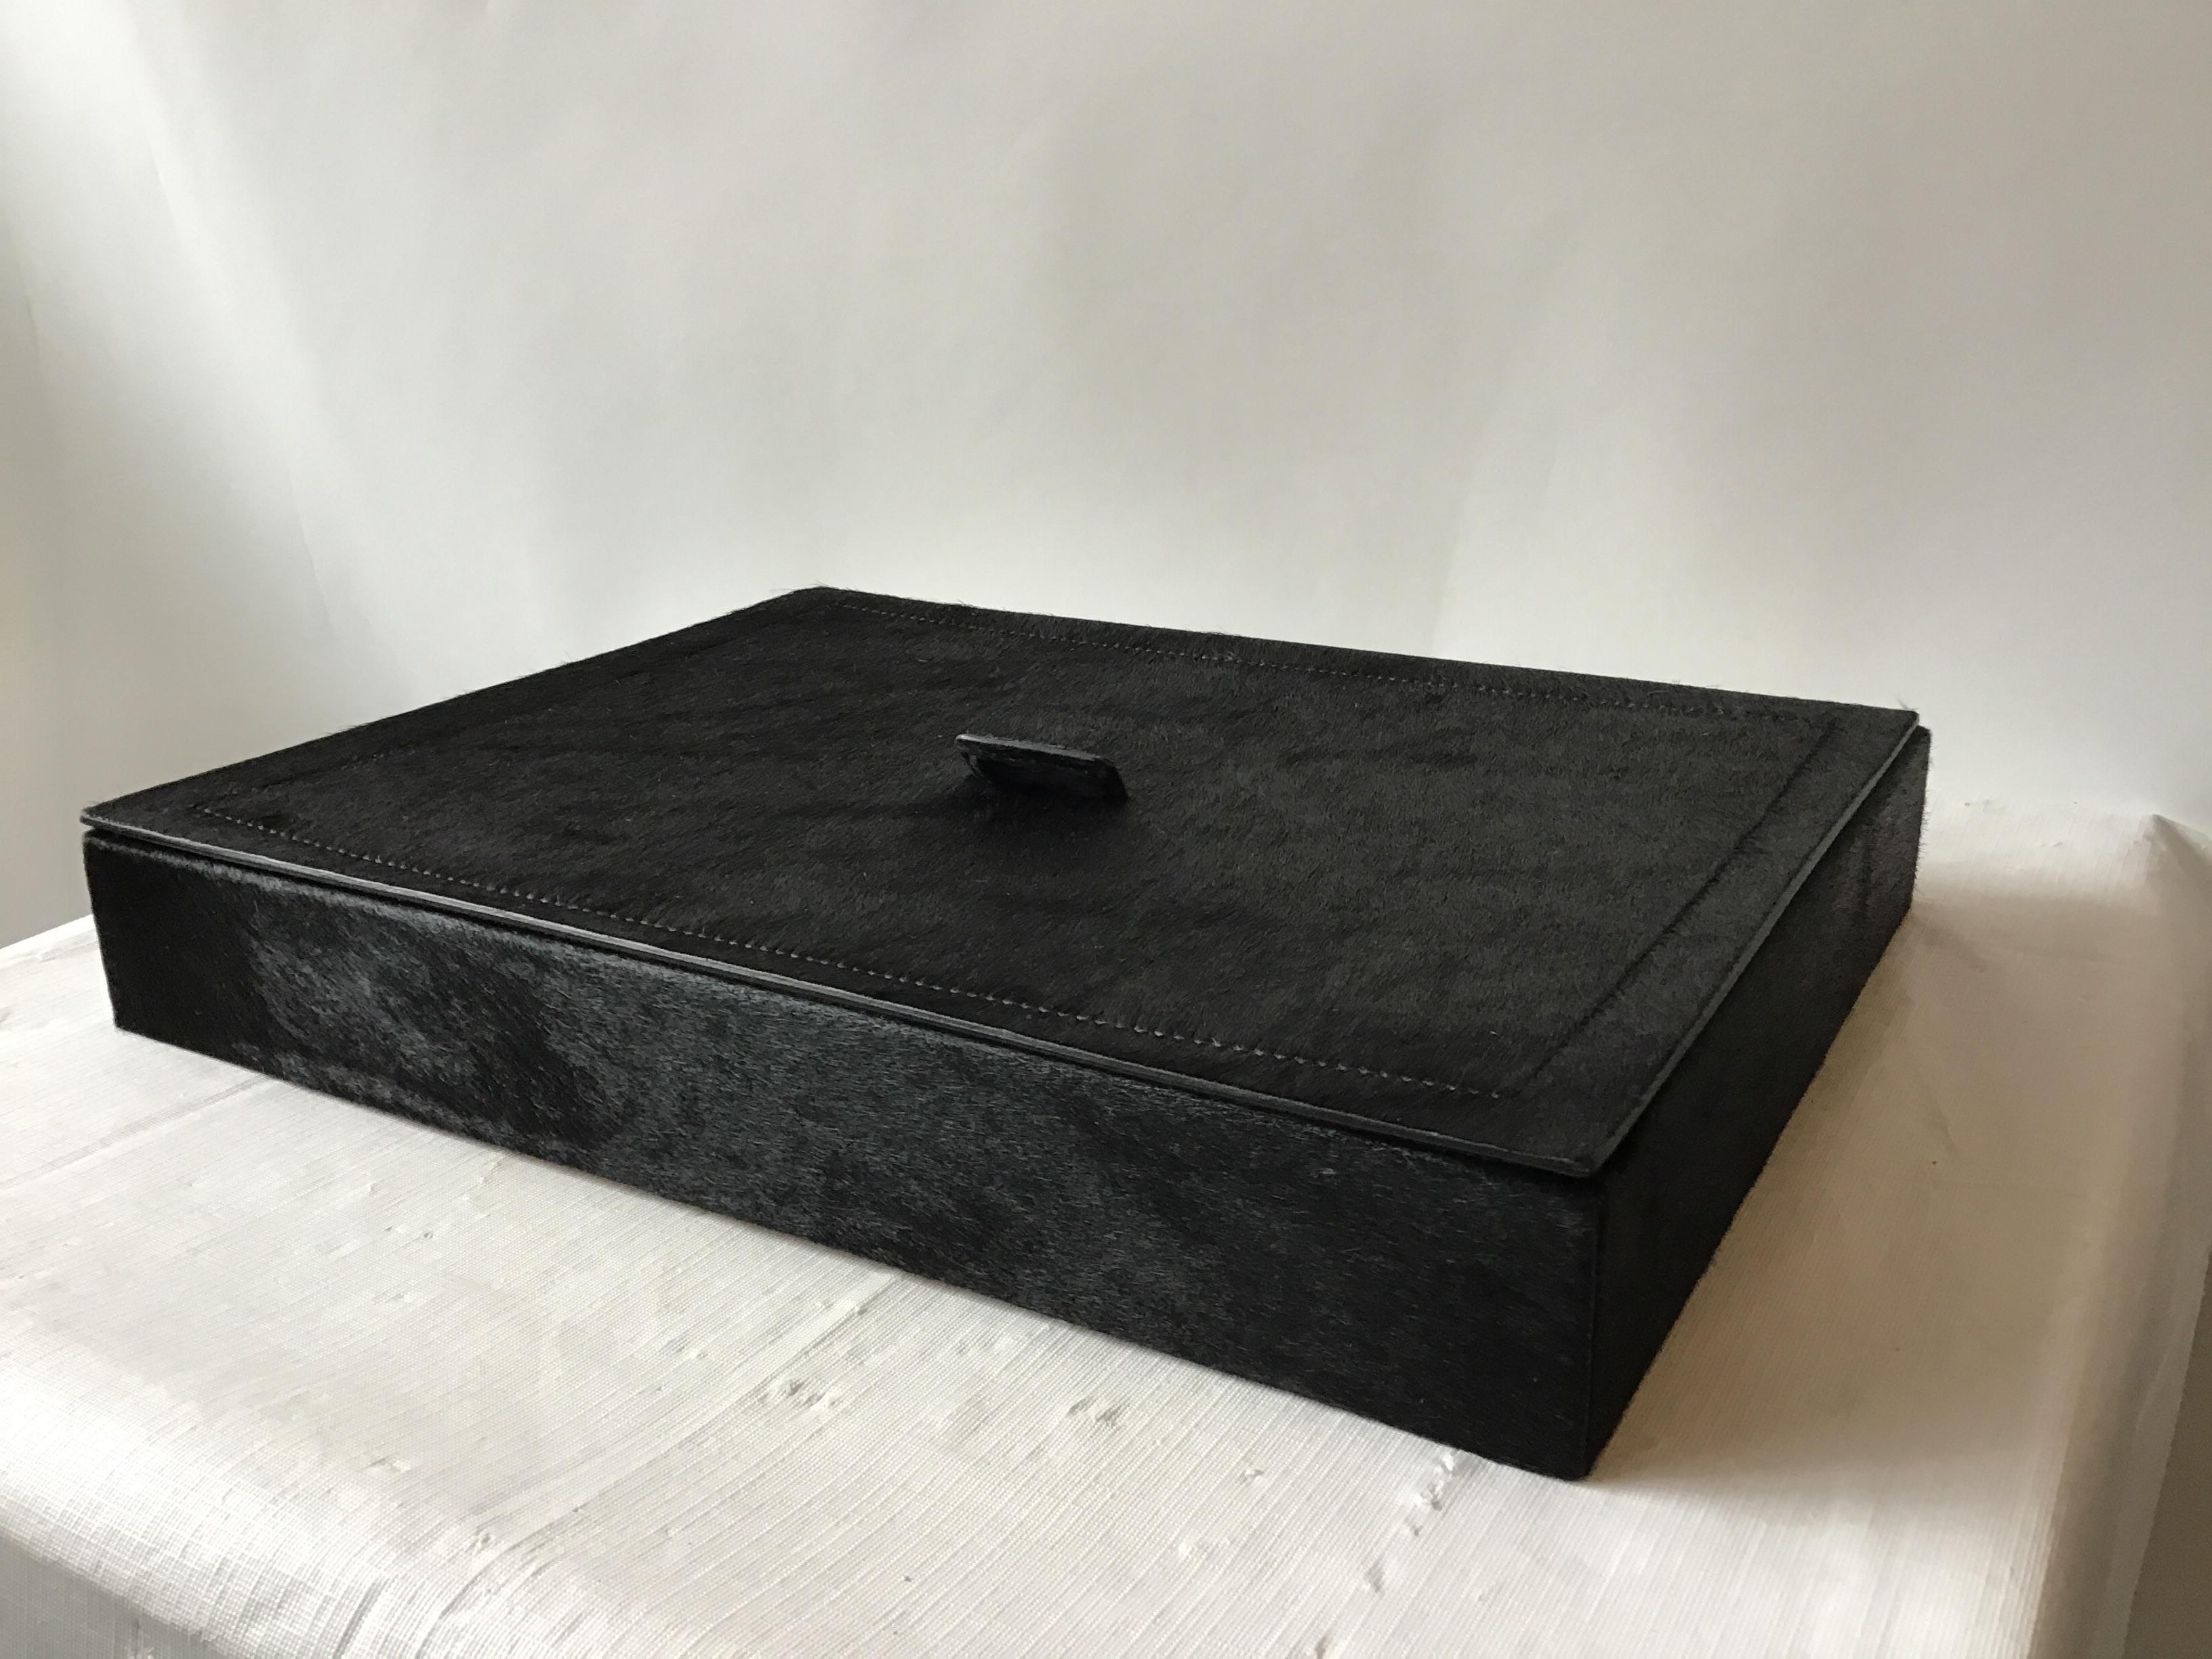 Black hide box by B. Home interiors (now called Giobagnara), made in Italy. Original price was 1250.00. Out of an East Hampton estate.